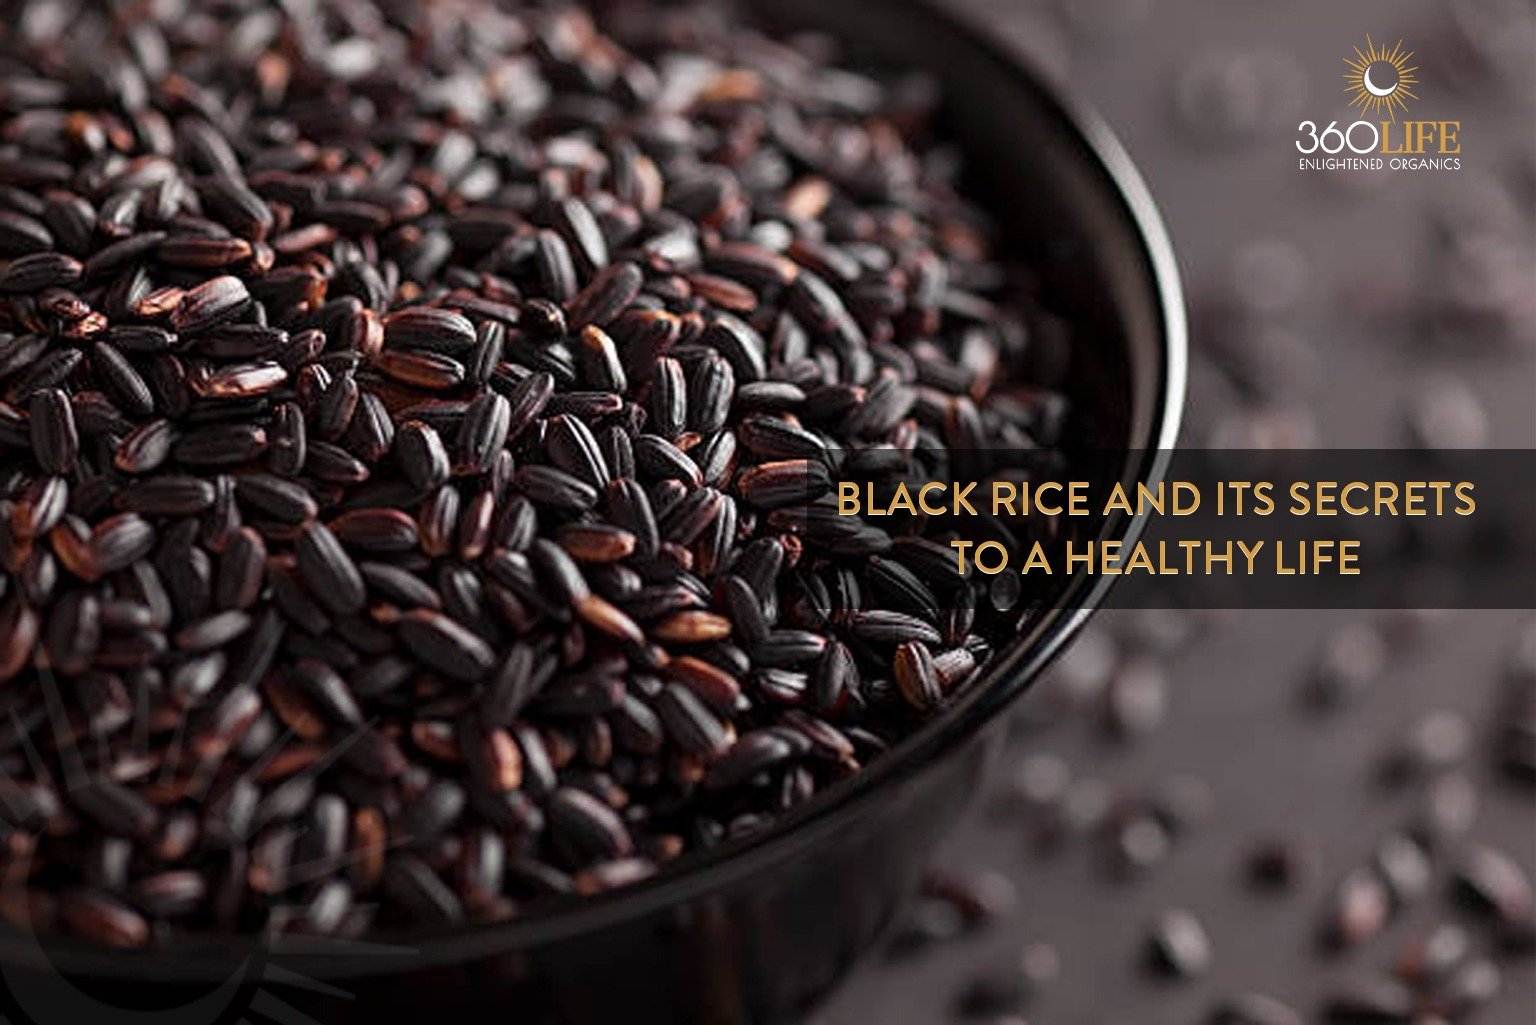 Black Rice and its Secrets to a Healthy Life